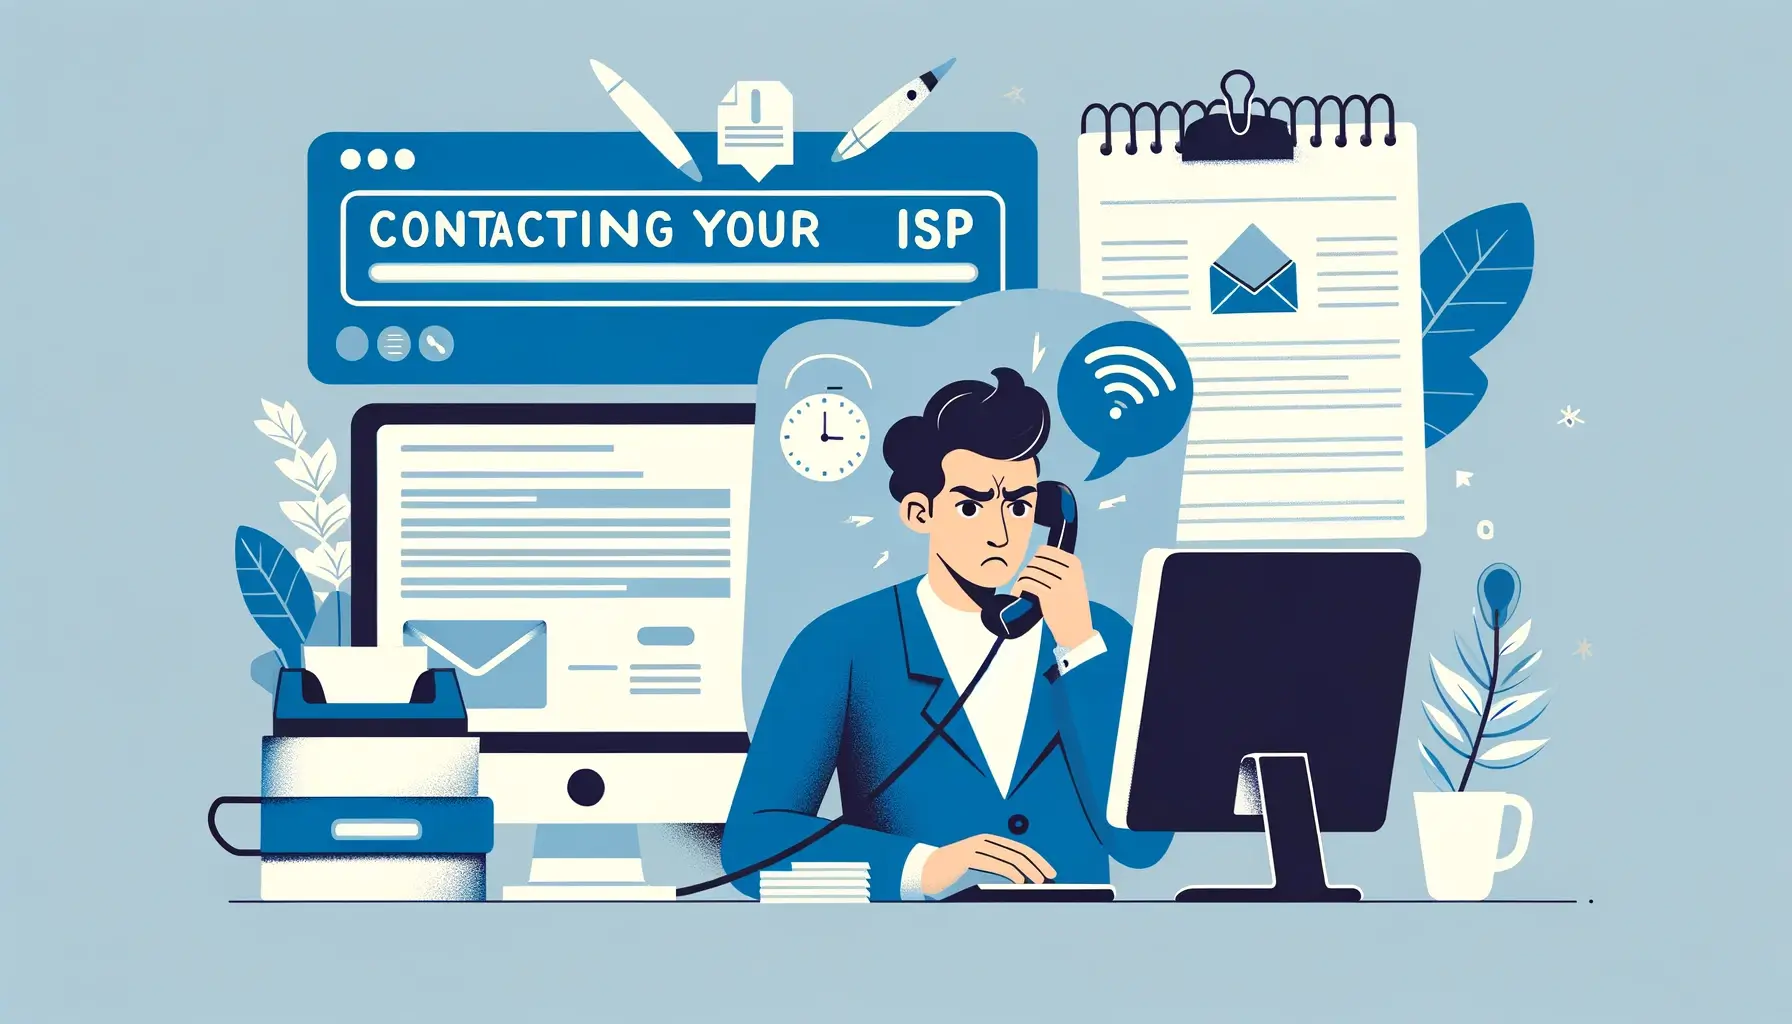 Contacting Your ISP